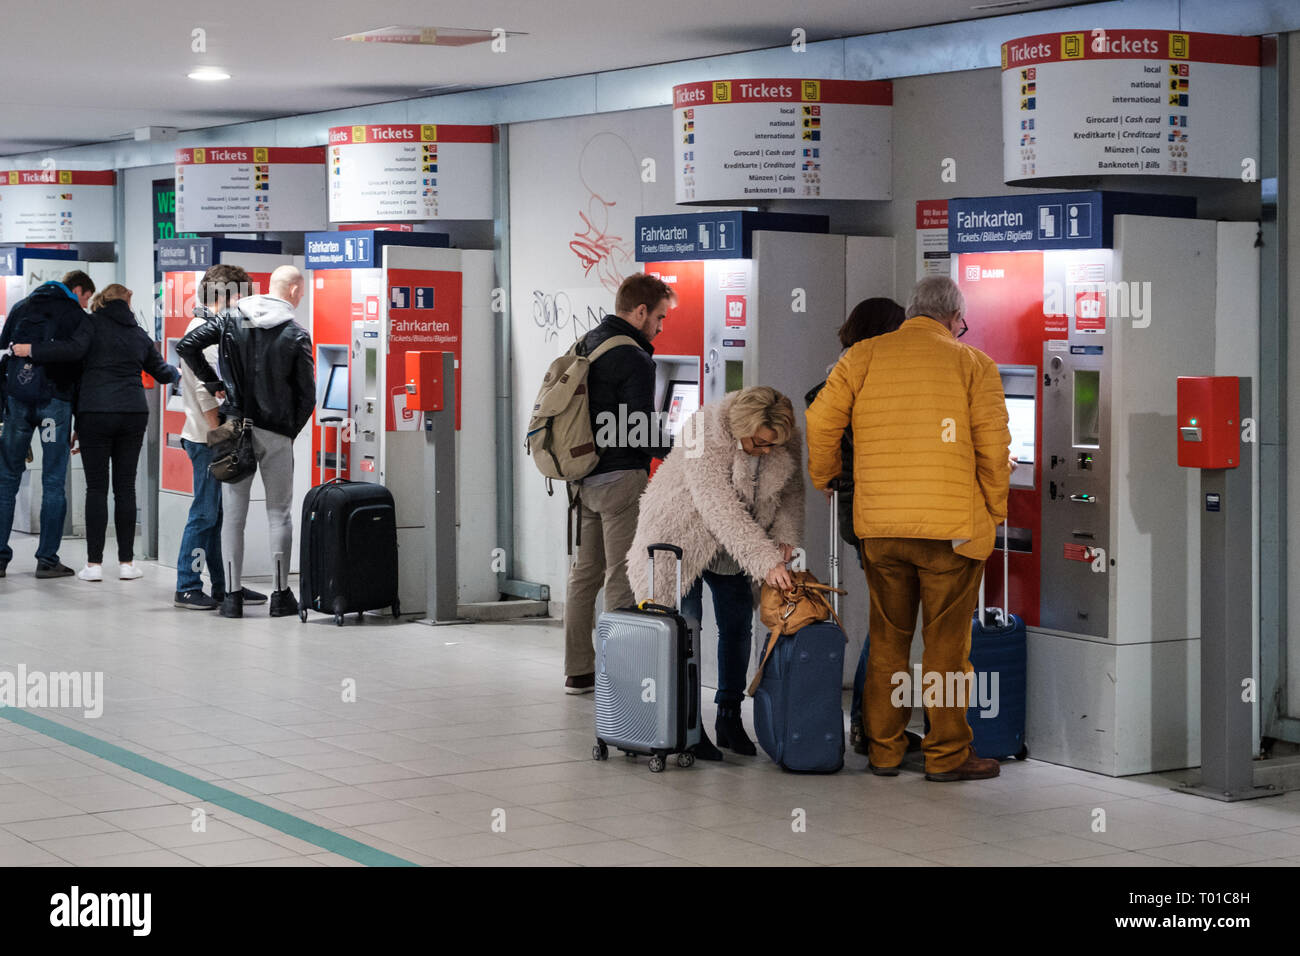 Berlin, Germany - march 2019: People buying ticket at vending machine in underground train station in Berlin Stock Photo